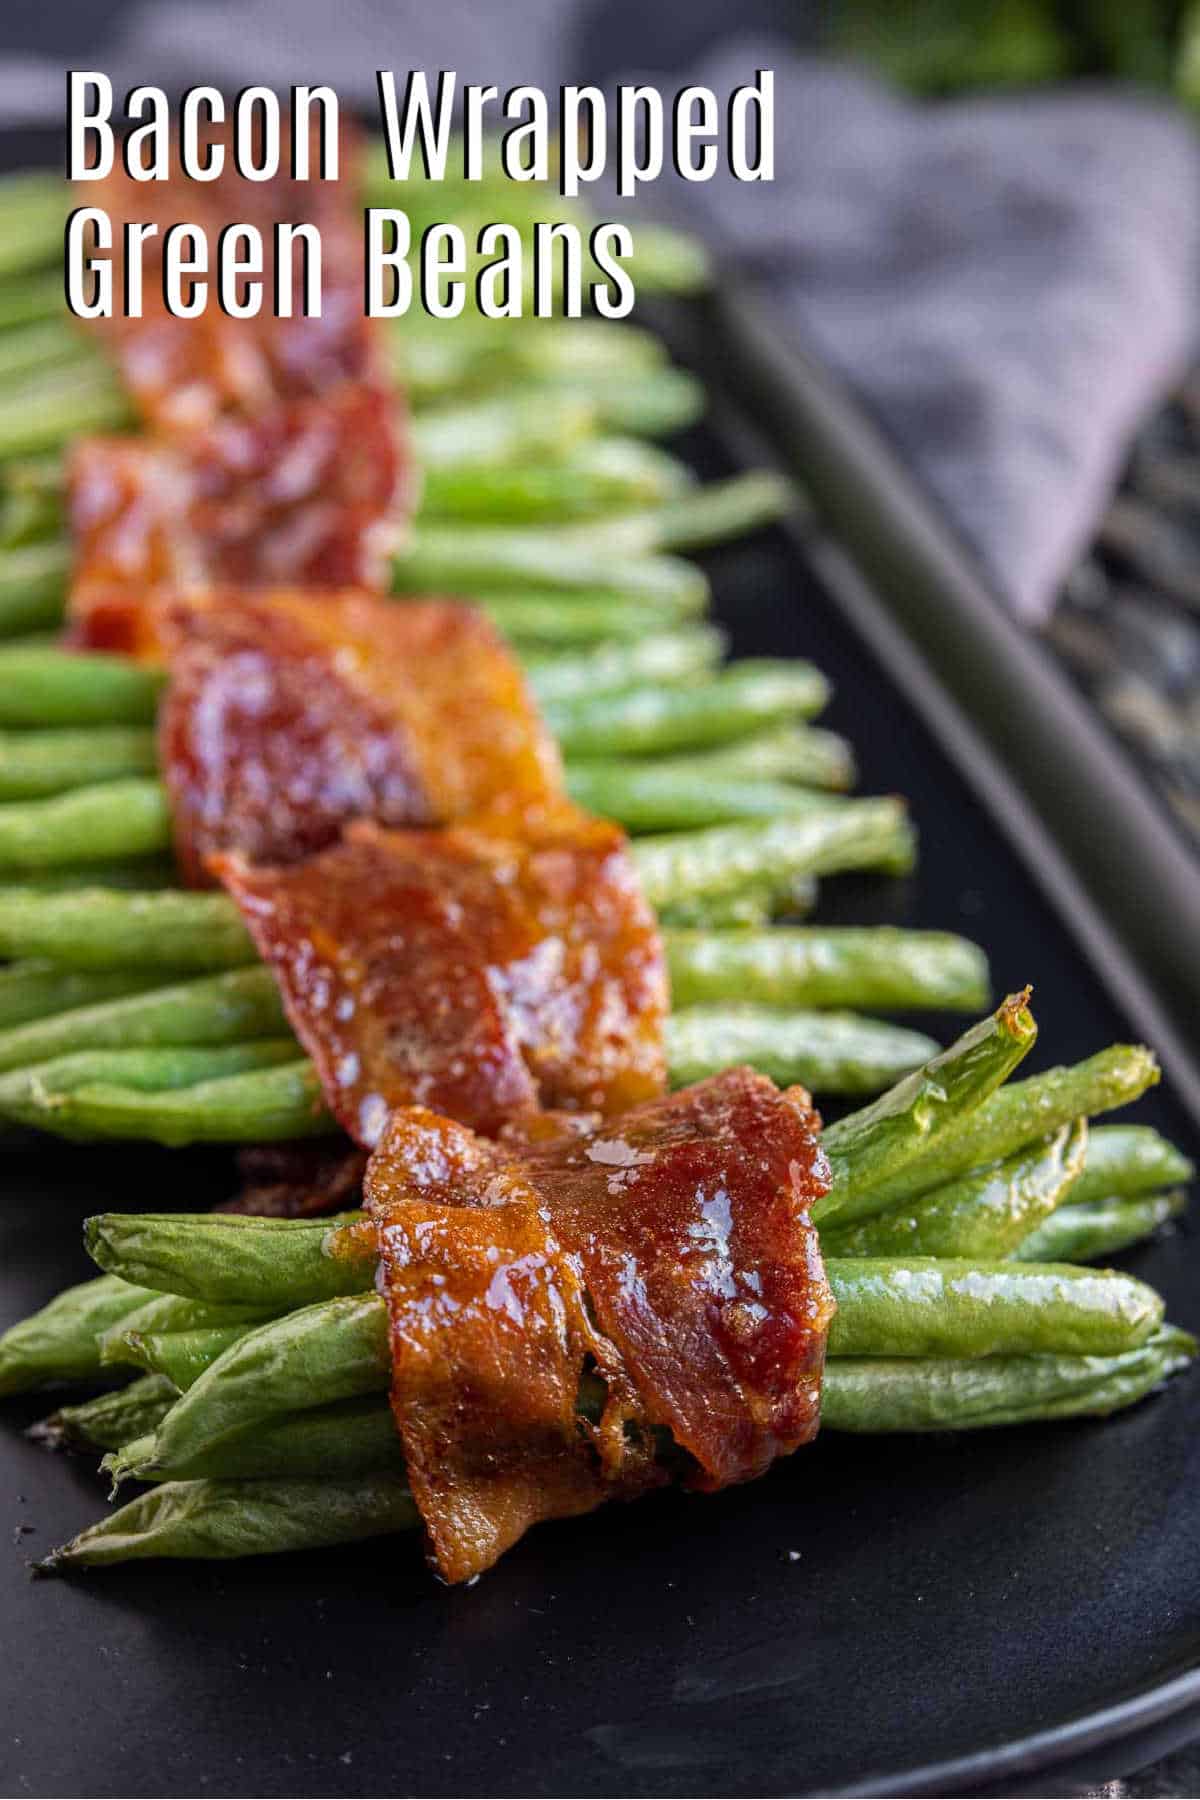 Bacon Wrapped Green Beans Recipe - Home. Made. Interest.